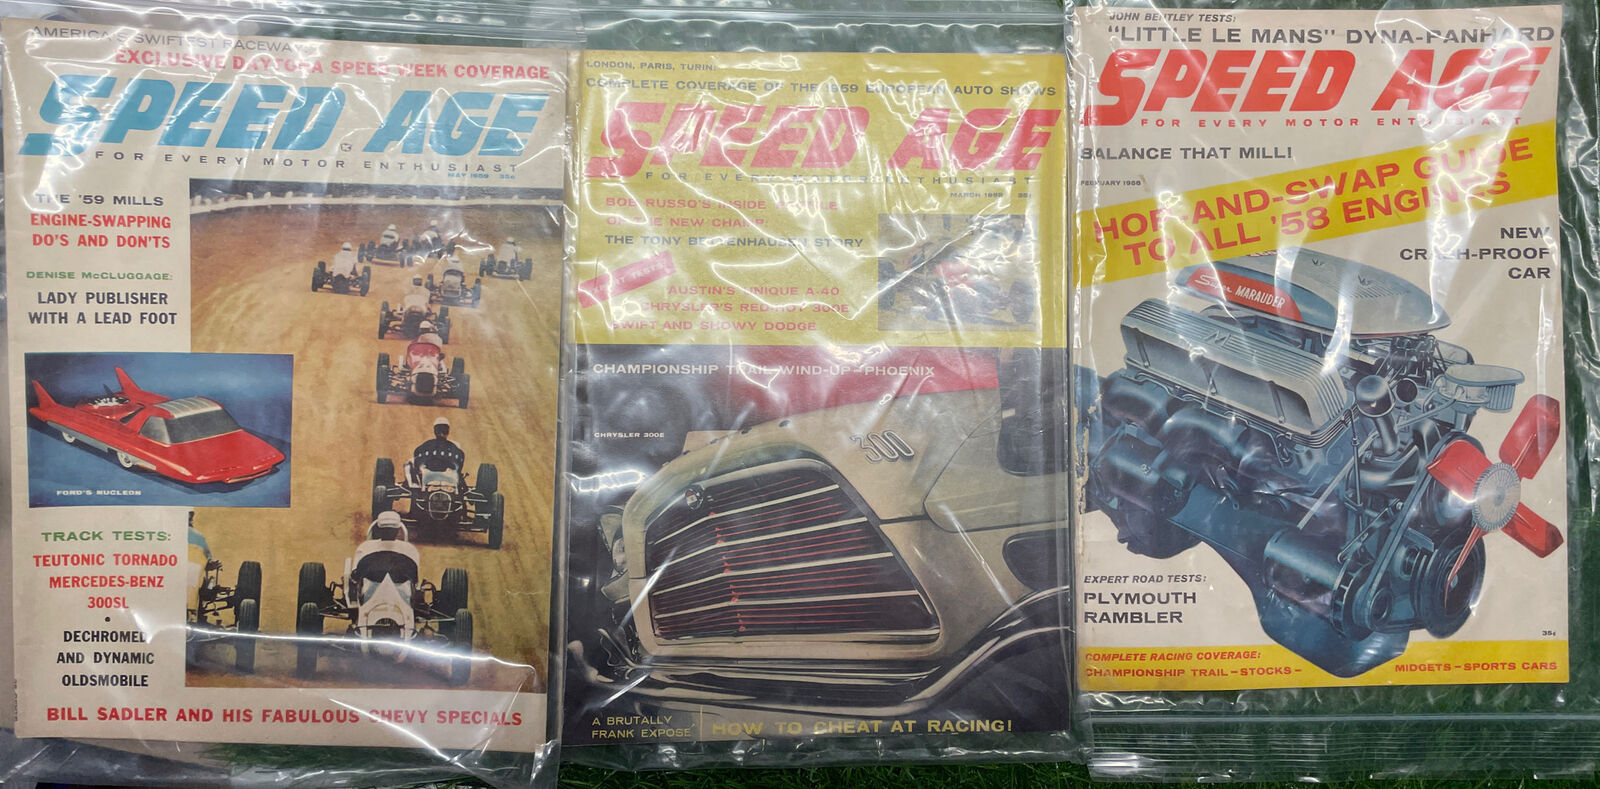 Speed Age magazine 1958-59 3-issues  Feb-58, May-59, March-59.  D4